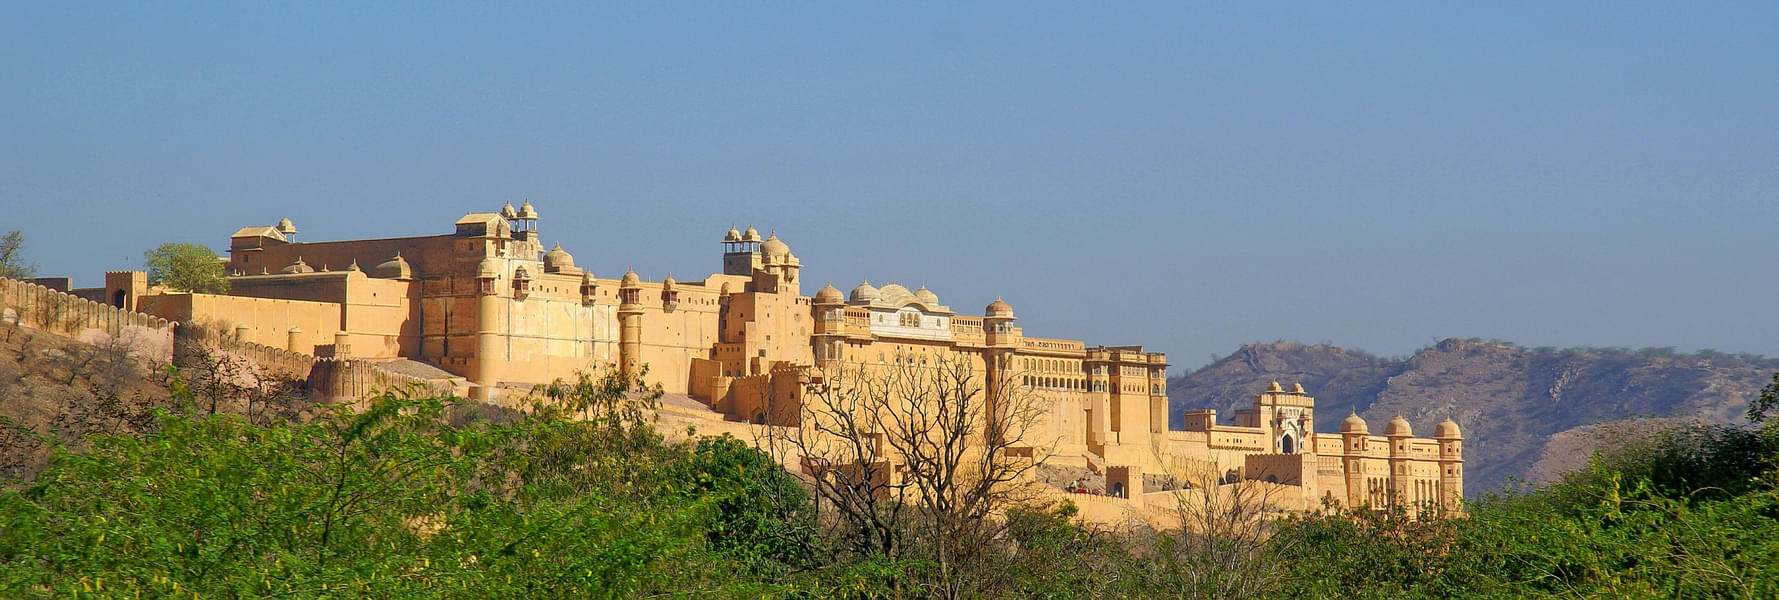 Entry Ticket To Amer Fort Image